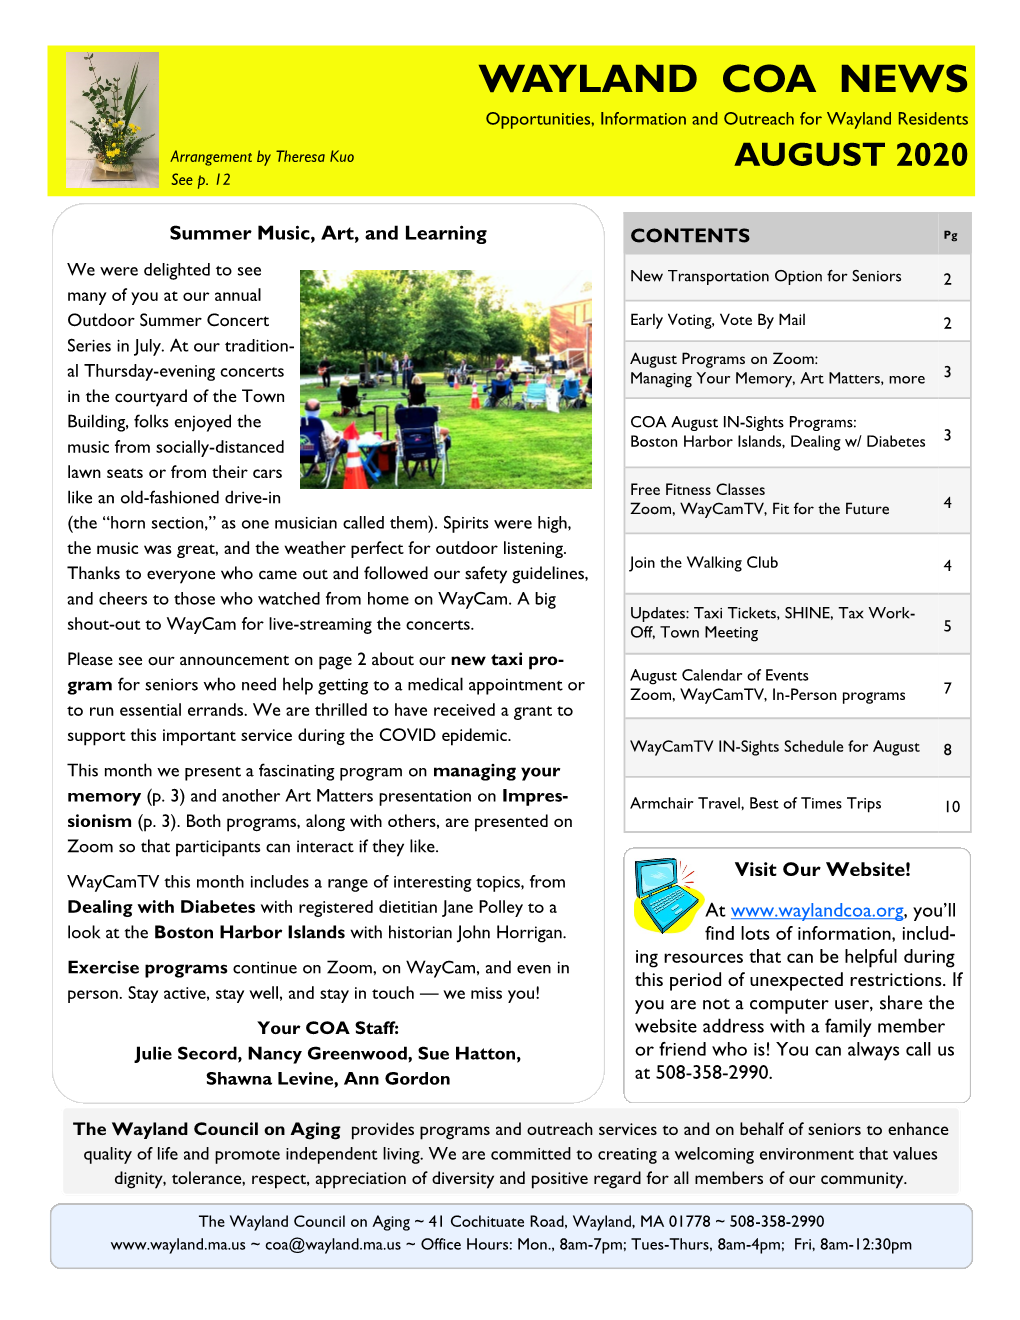 WAYLAND COA NEWS Opportunities, Information and Outreach for Wayland Residents Arrangement by Theresa Kuo AUGUST 2020 See P